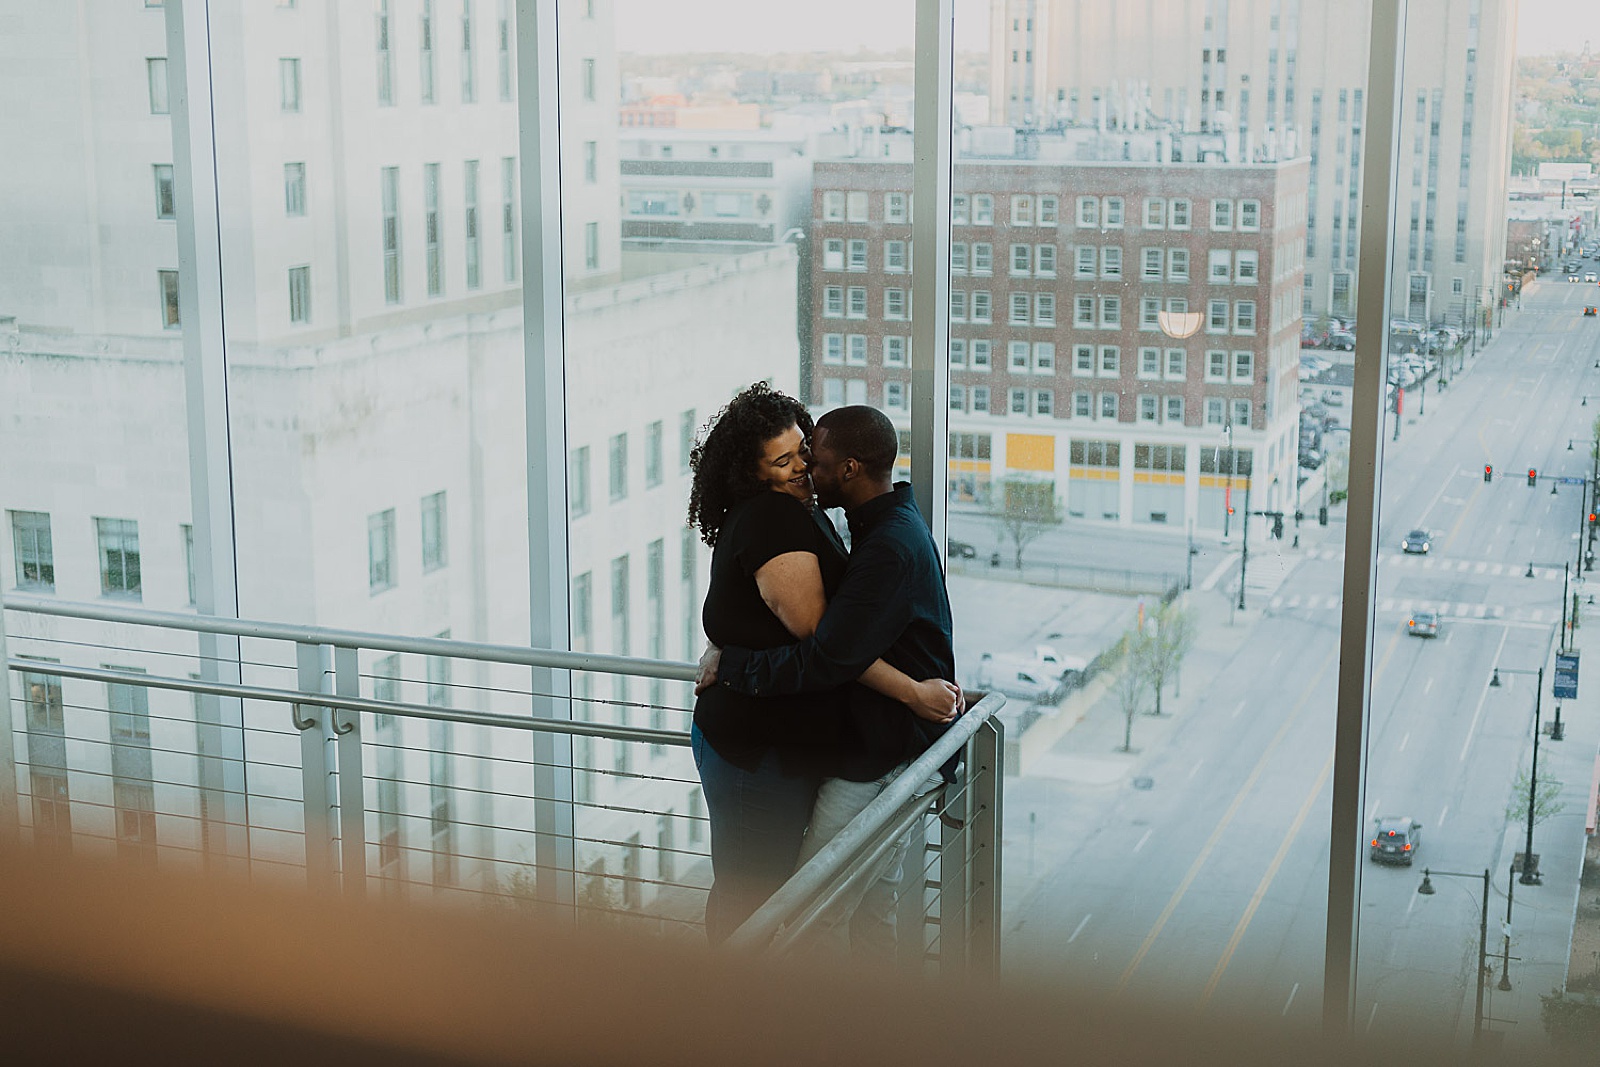 Parking garage engagement photos in Kansas City by Caitlyn Cloud Photography